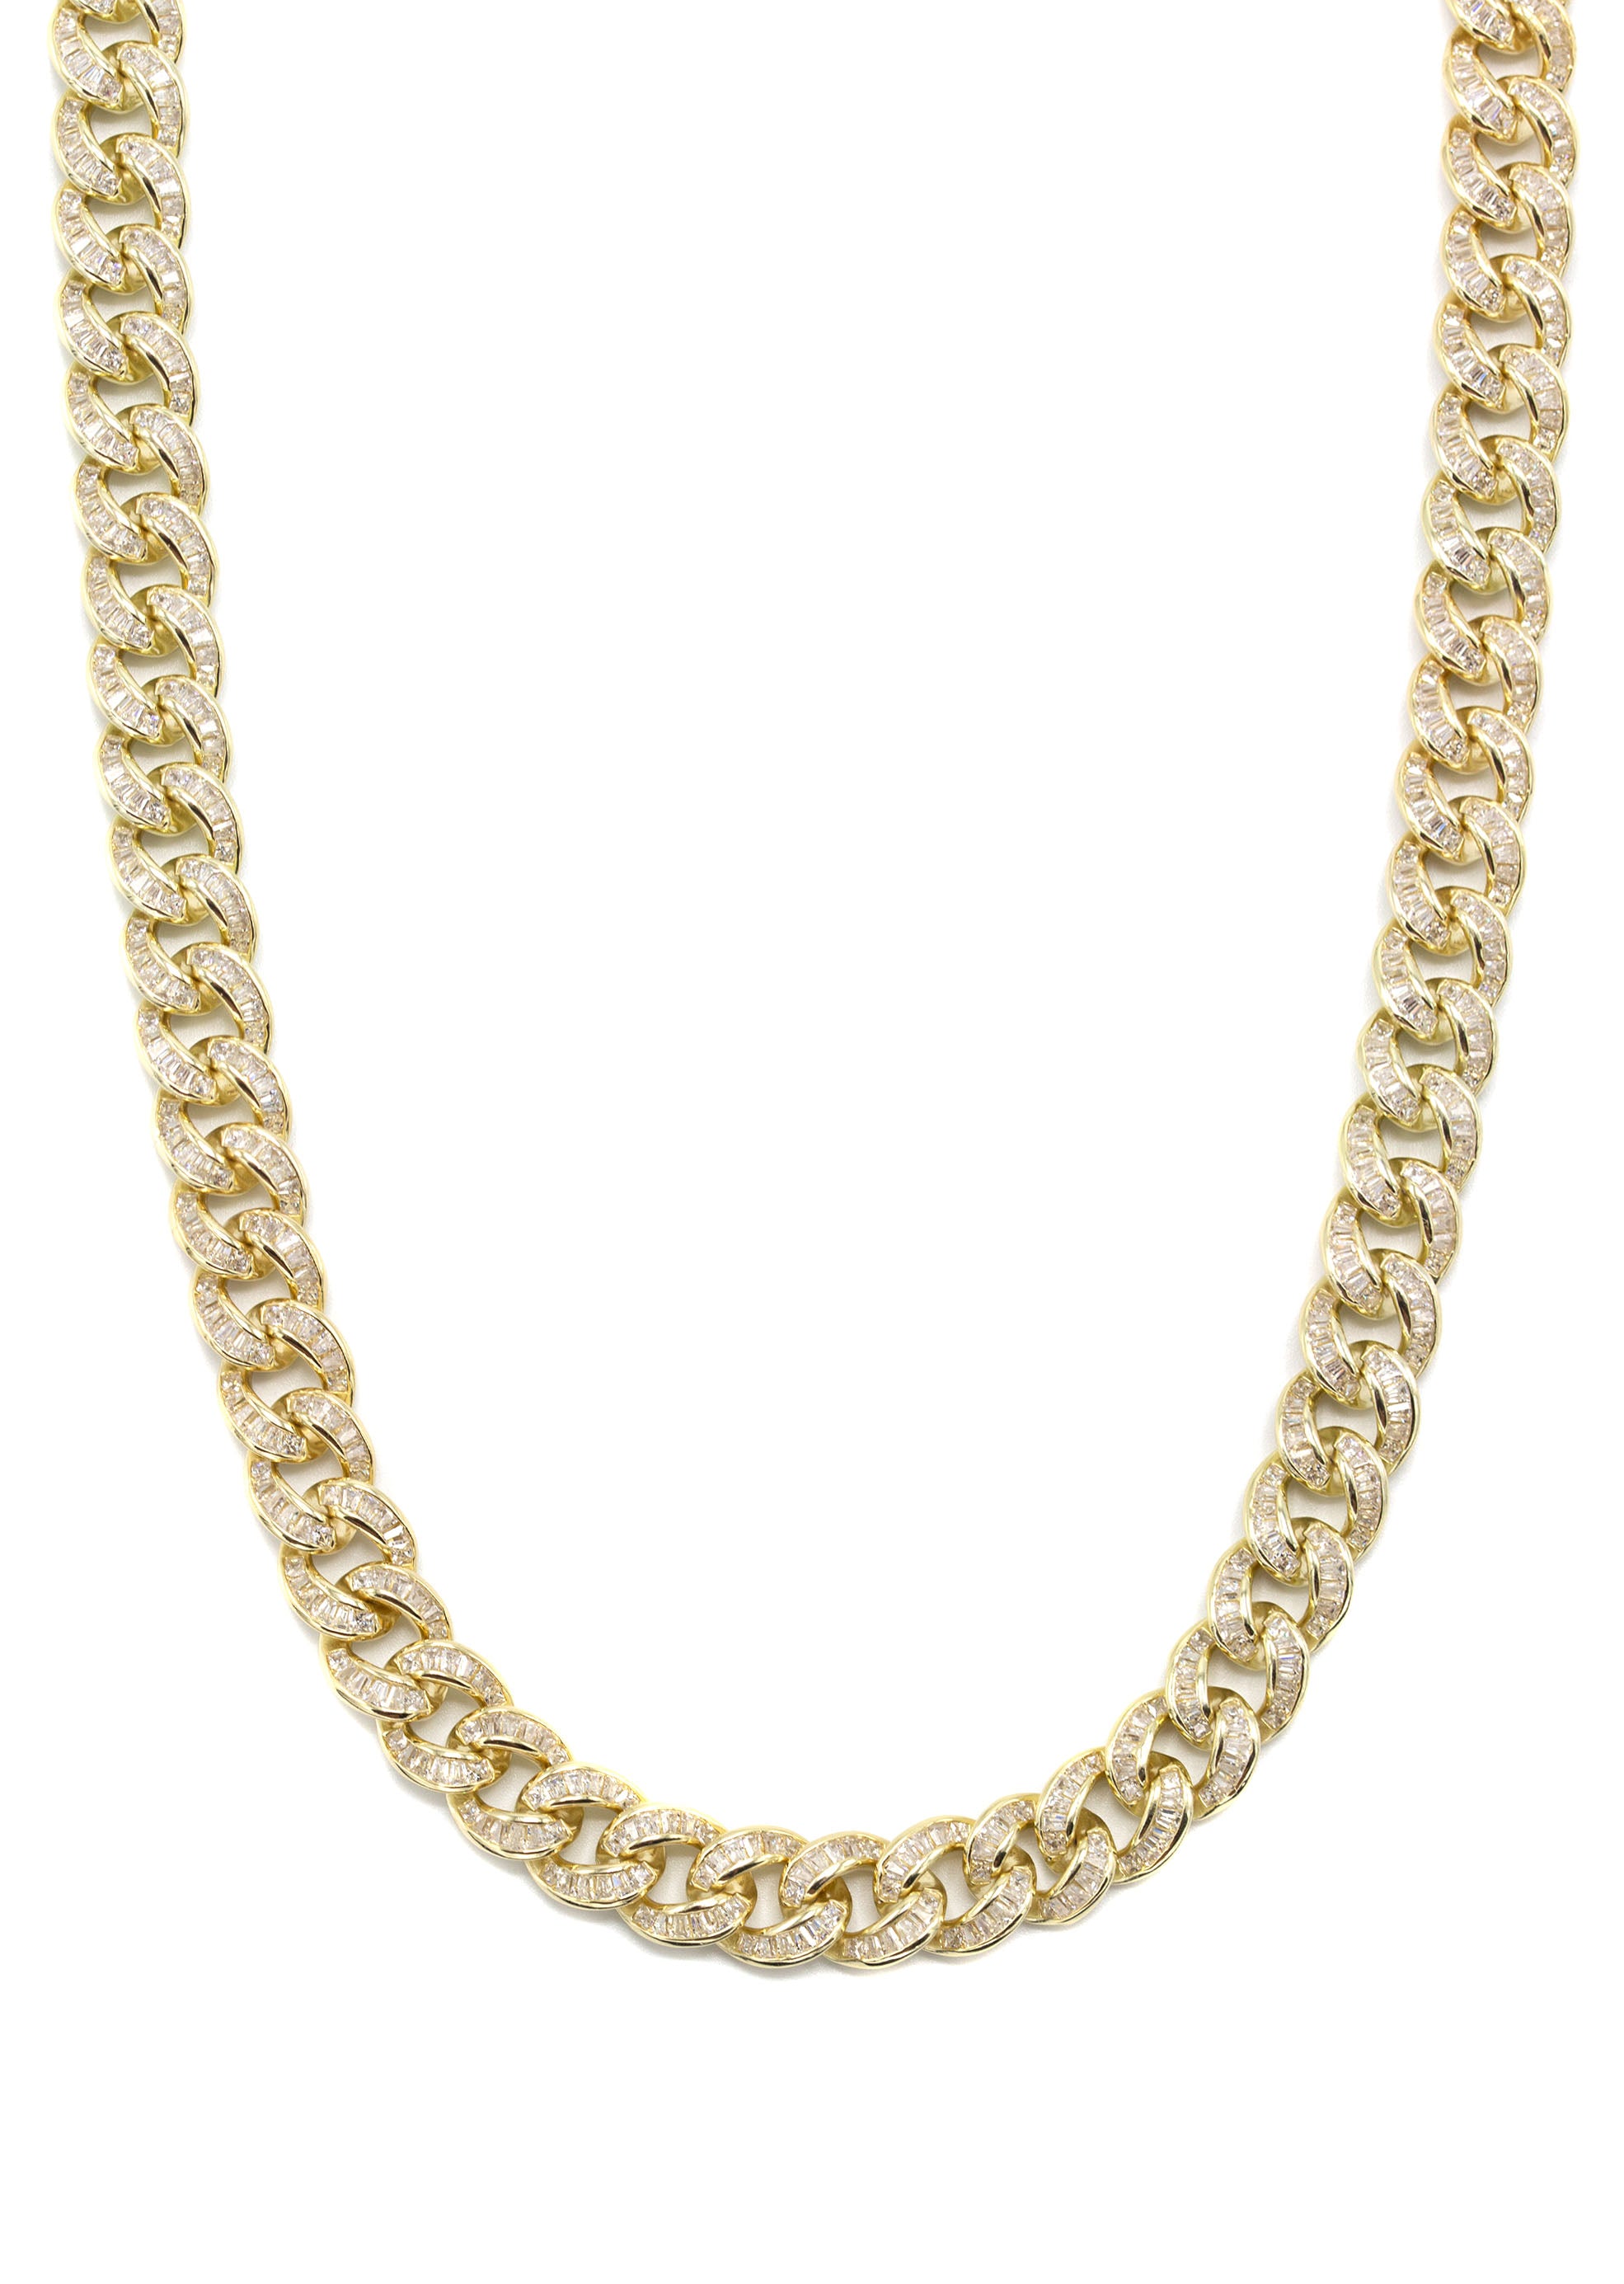 Silver Chain -  Gold Baguette Iced Out Miami Cuban Link Chain